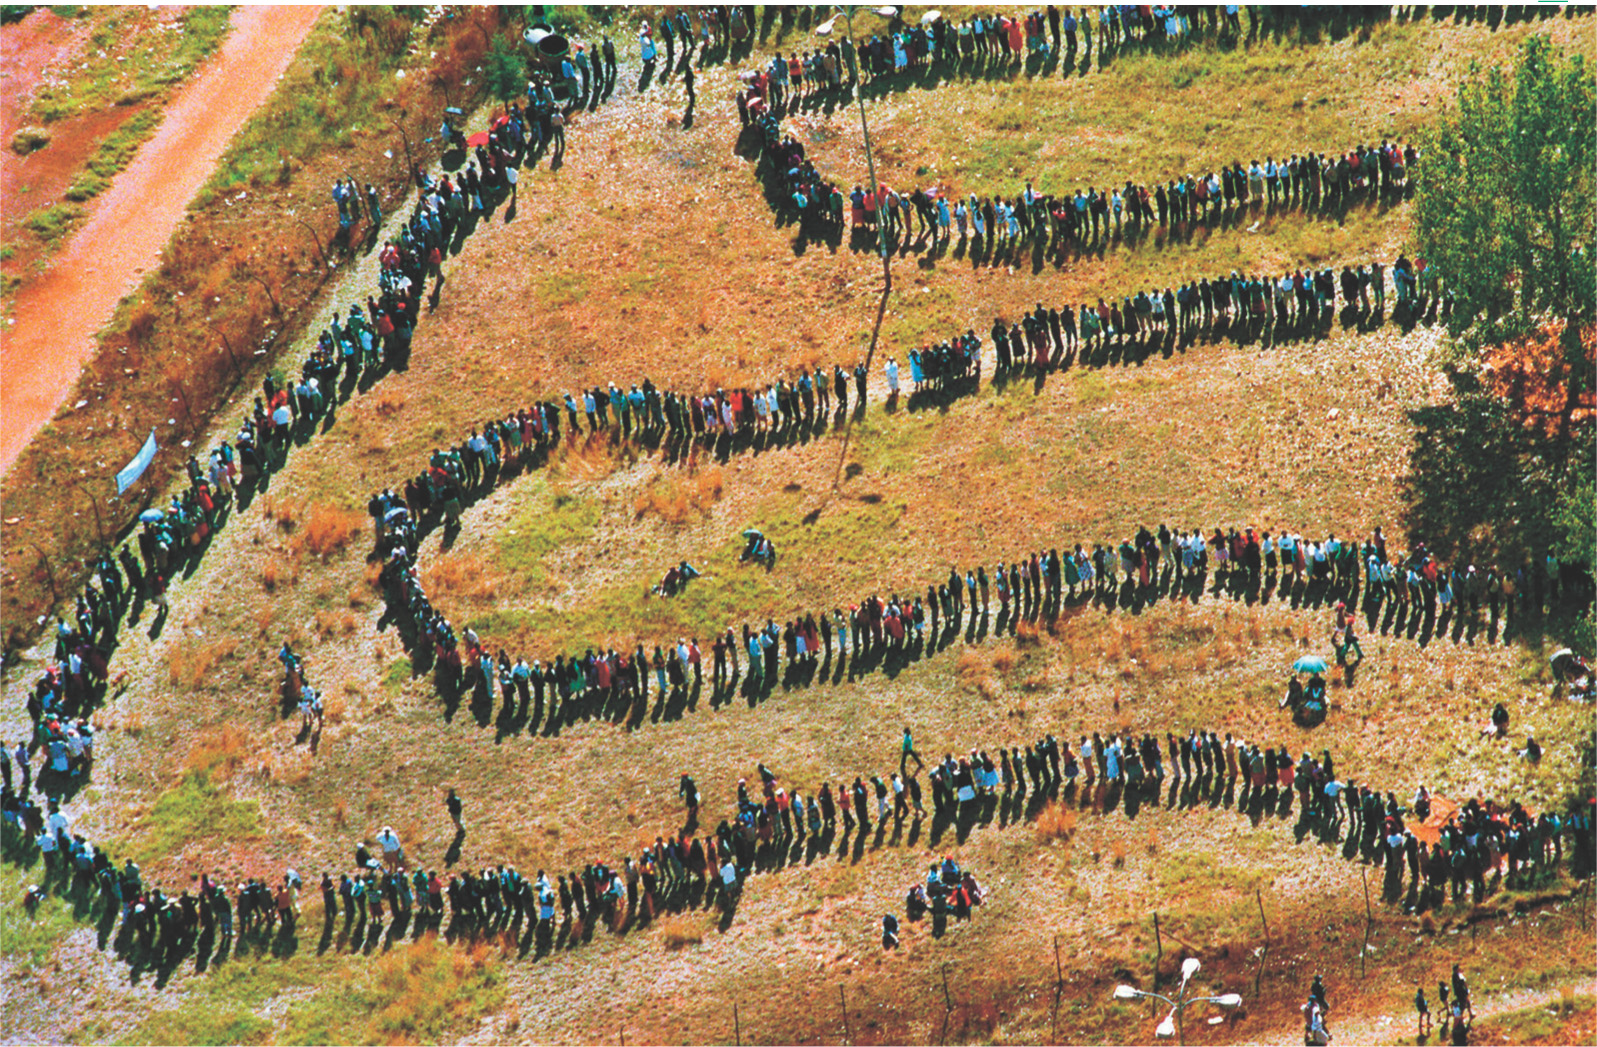 A photo: hundreds of people
stand in a long line that curves back and forth across a field.